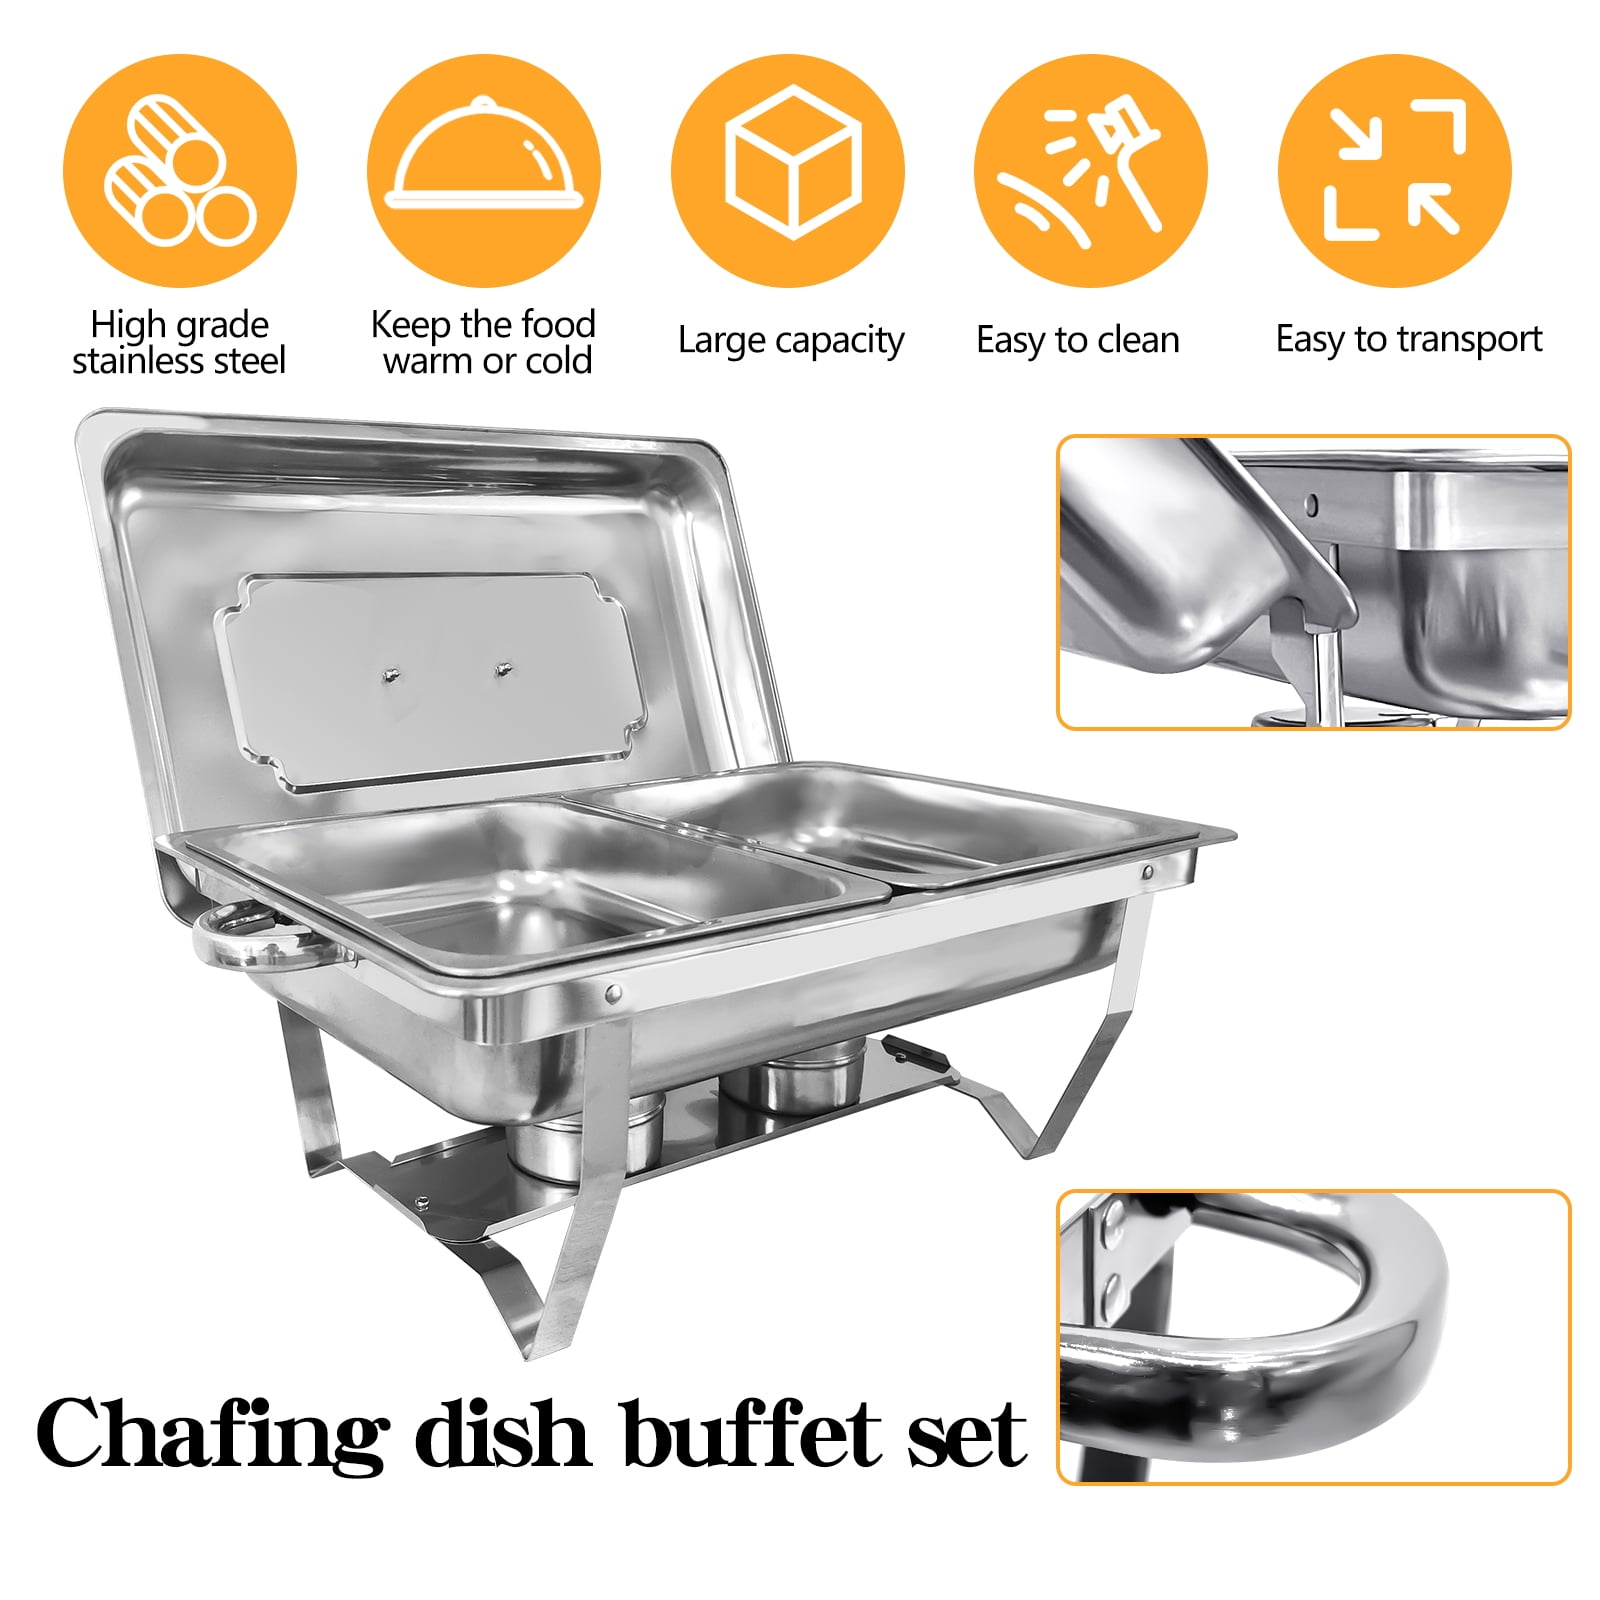 Ufurpie 4 Pack 8 QT Stainless Steel Chafing Dish Buffet Set,Chafers and Buffet  Warmers Sets,Foldable Chafing Dishes,Buffet Servers and Warmers,Food Warmers  